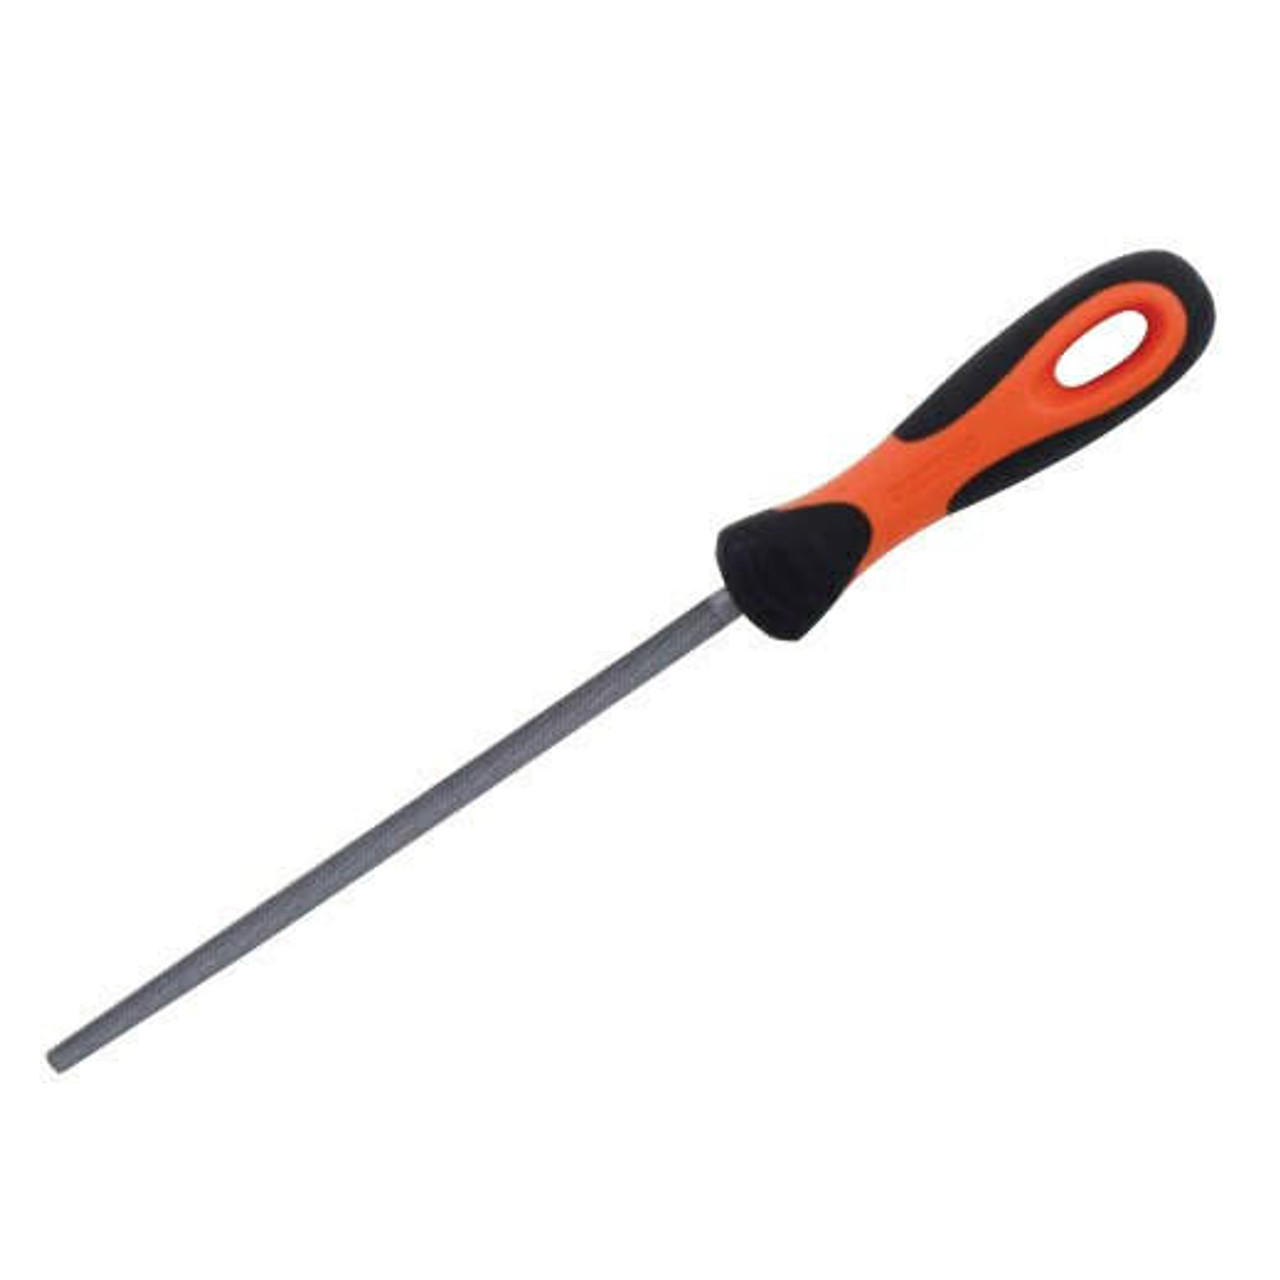 Bahco 10" Bahco 41 TPI Round Engineering File with Ergo Handle - Smooth Cut - 1-230-10-3-2 